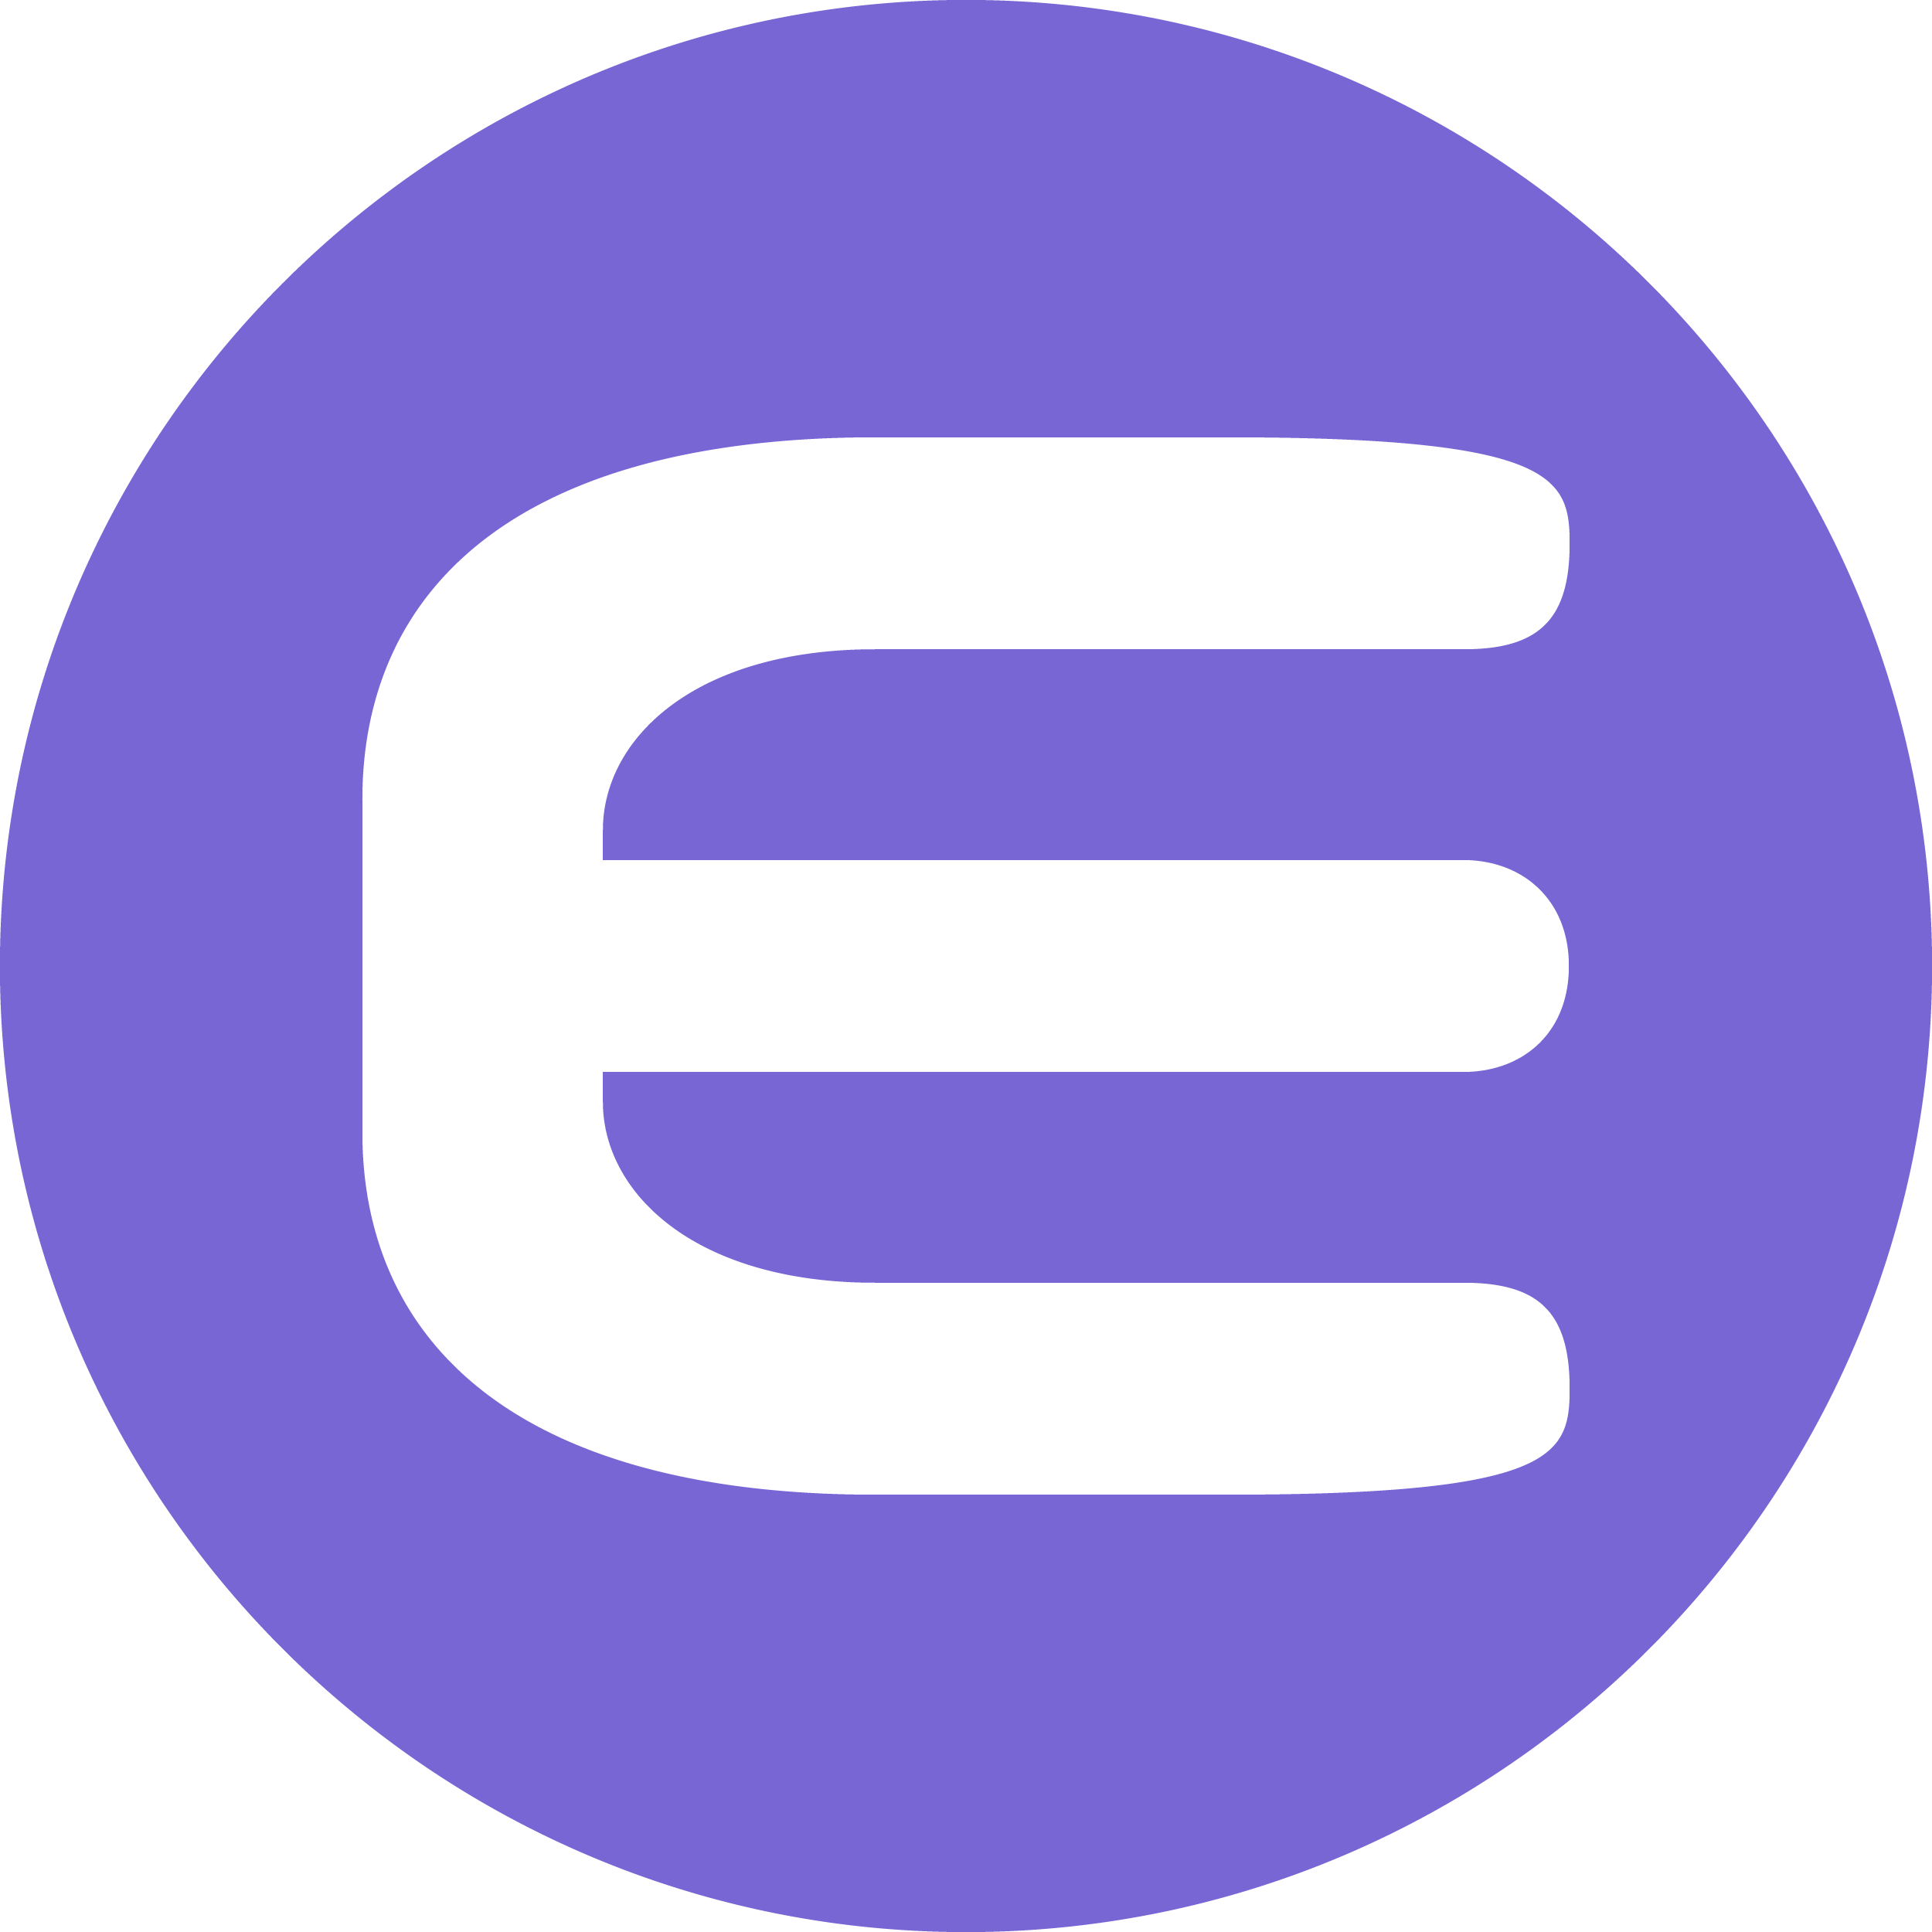 Enjin Coin Price Prediction for Today, February 11 – ENJ Technical Analysis